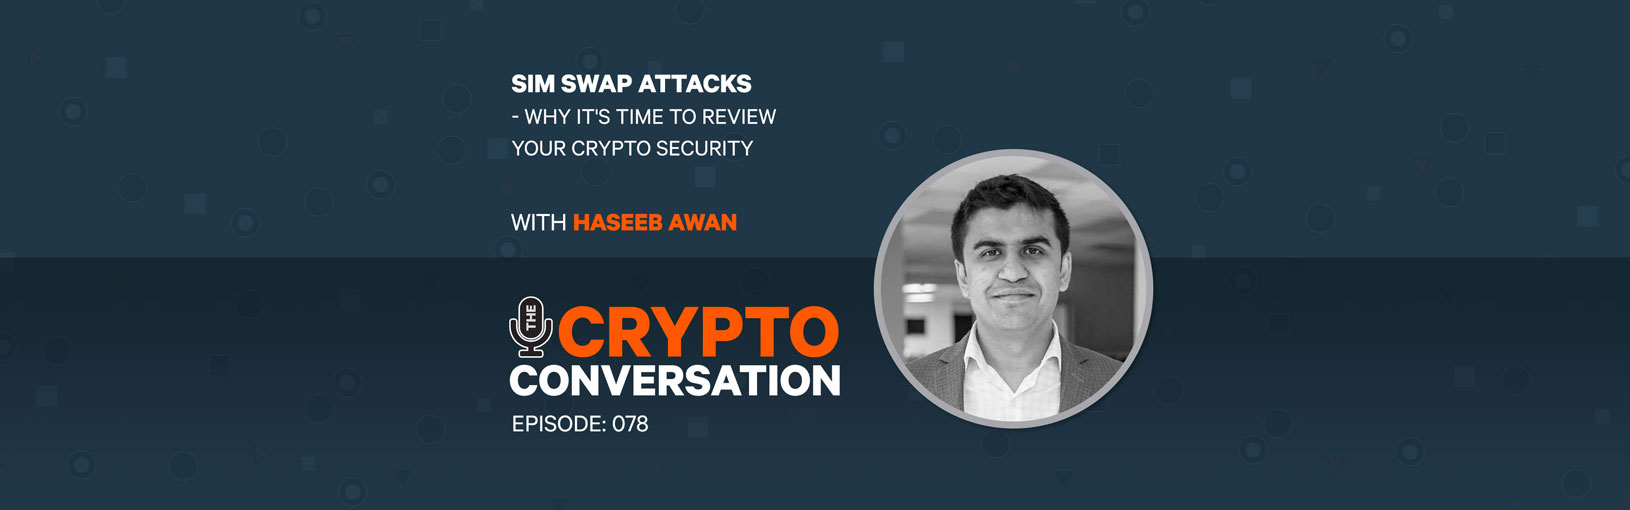 Sim Swap Attacks – Why it’s time to review your crypto security